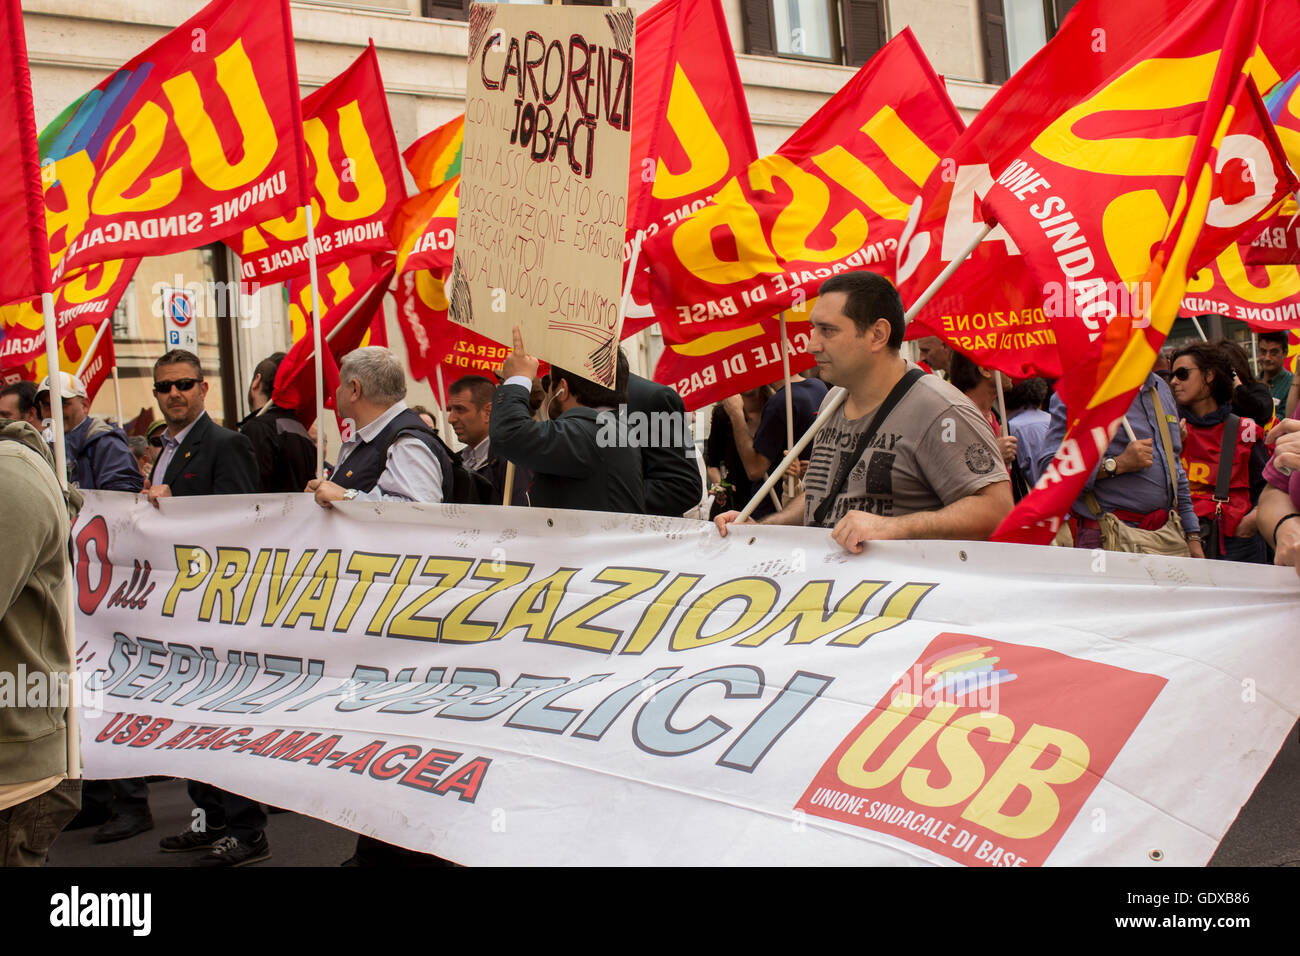 Protesters with banners against the privatization of public services Stock Photo